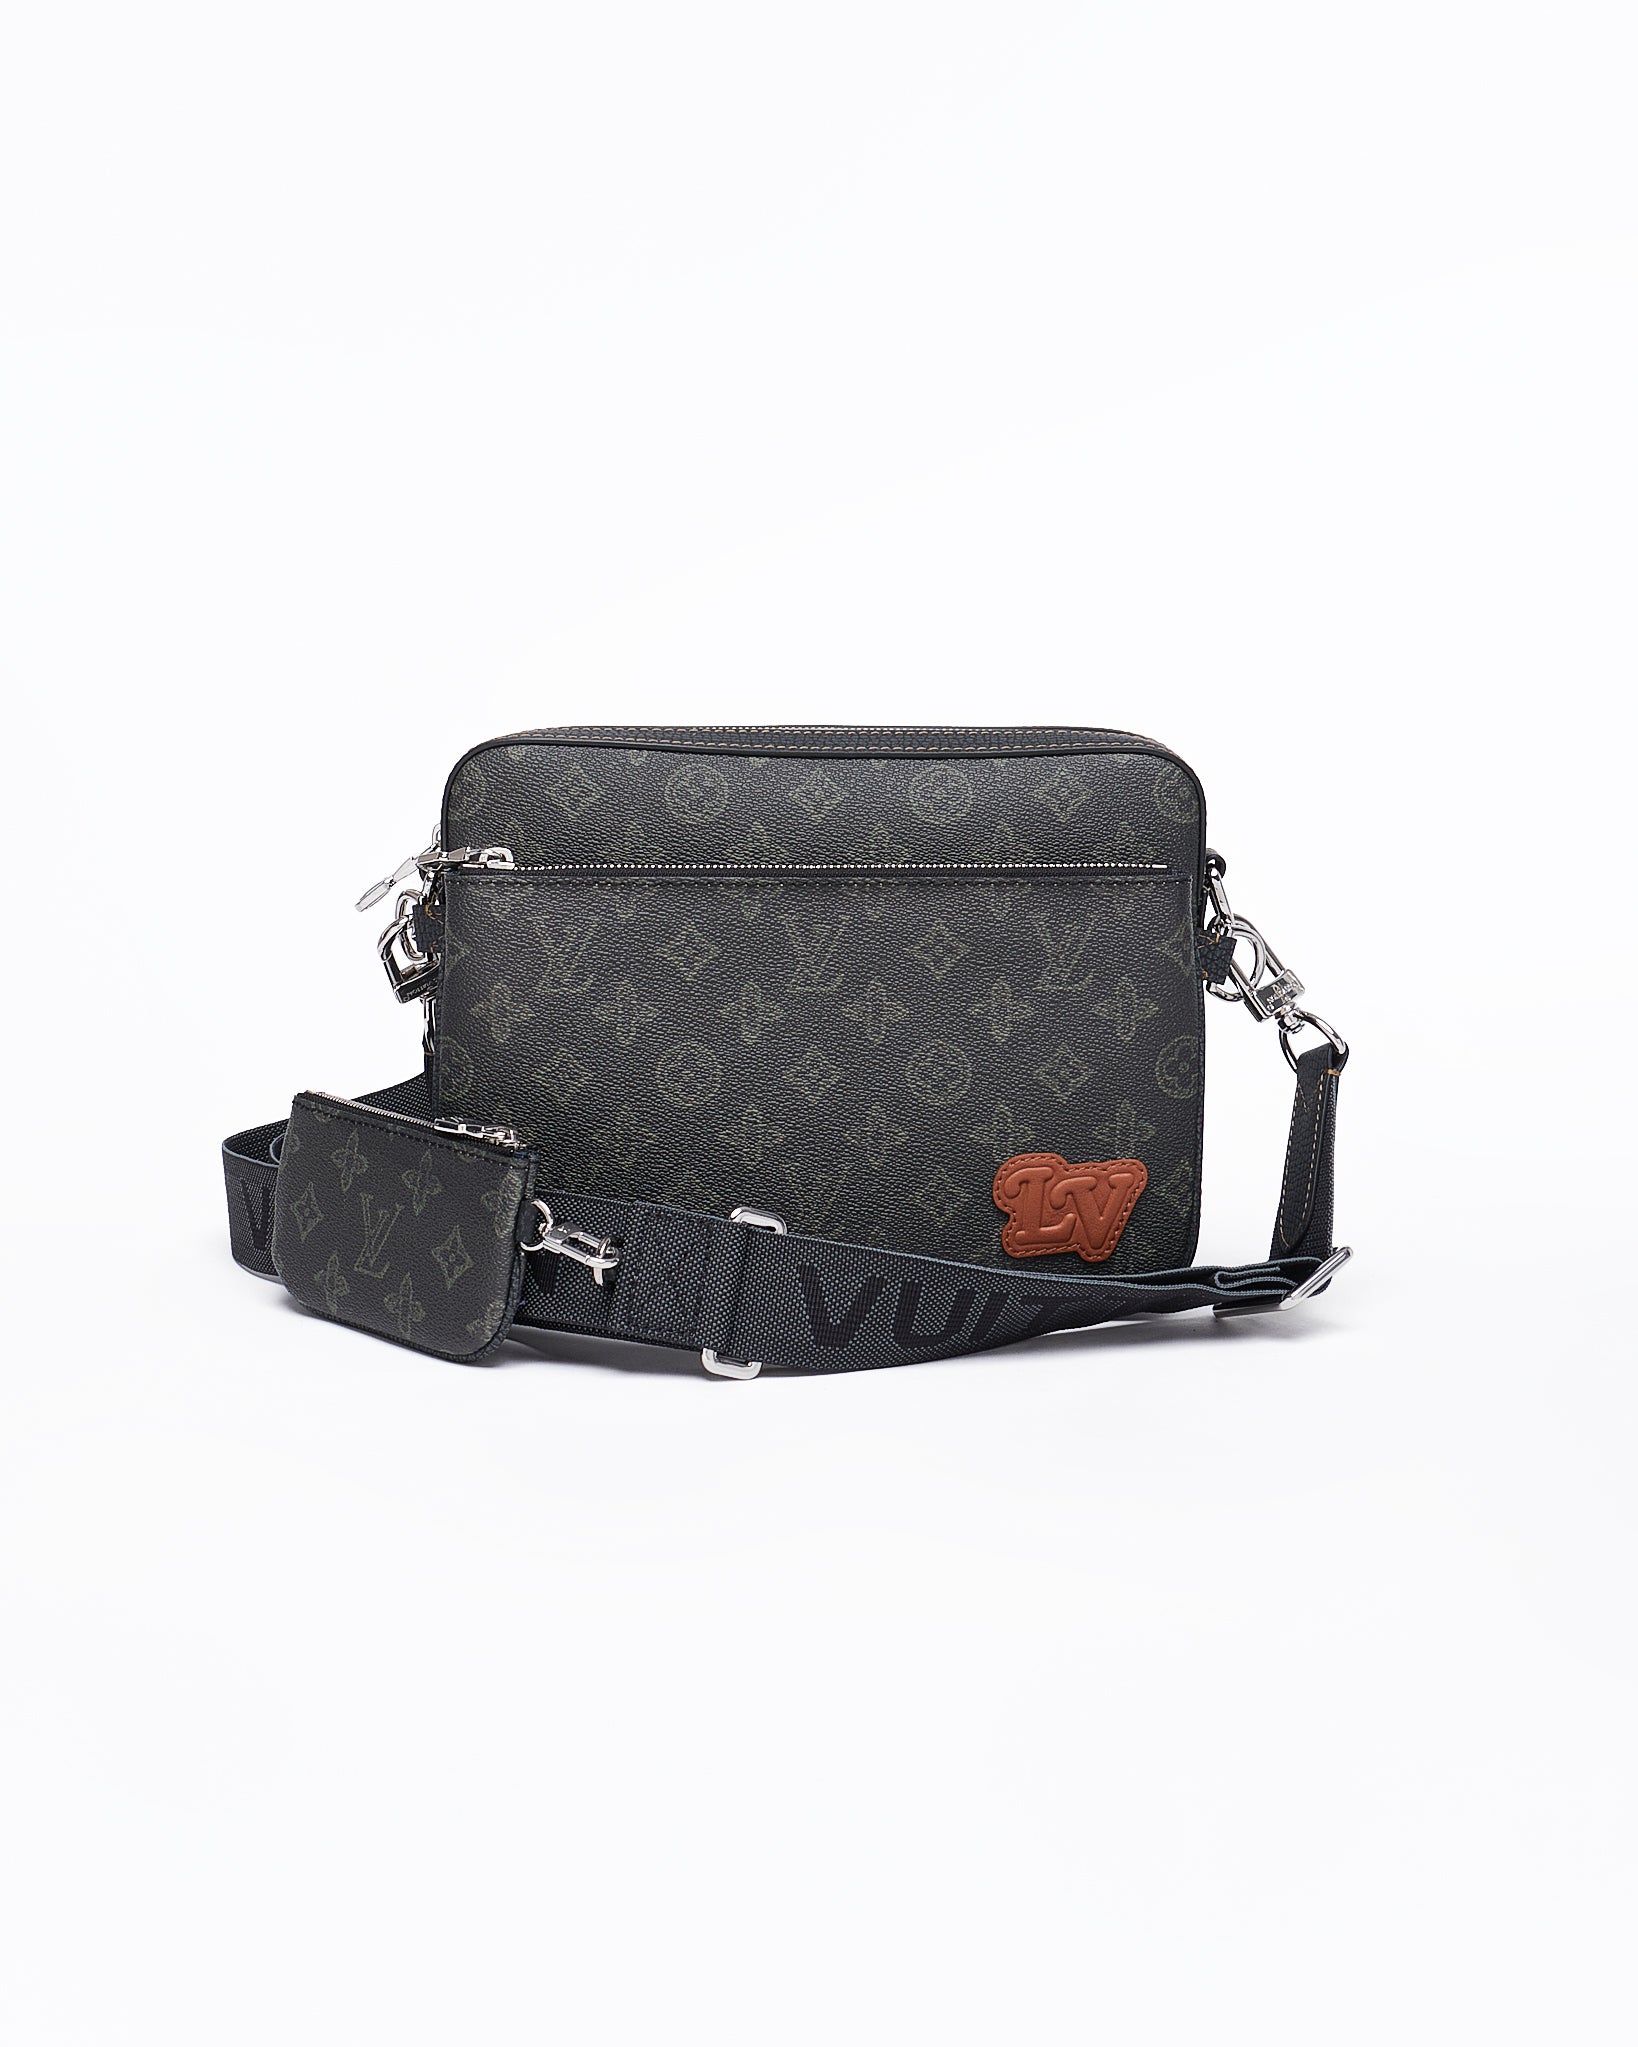 RESERVED) Authentic Louis Vuitton N41253 Hoxton GM Sling messenger